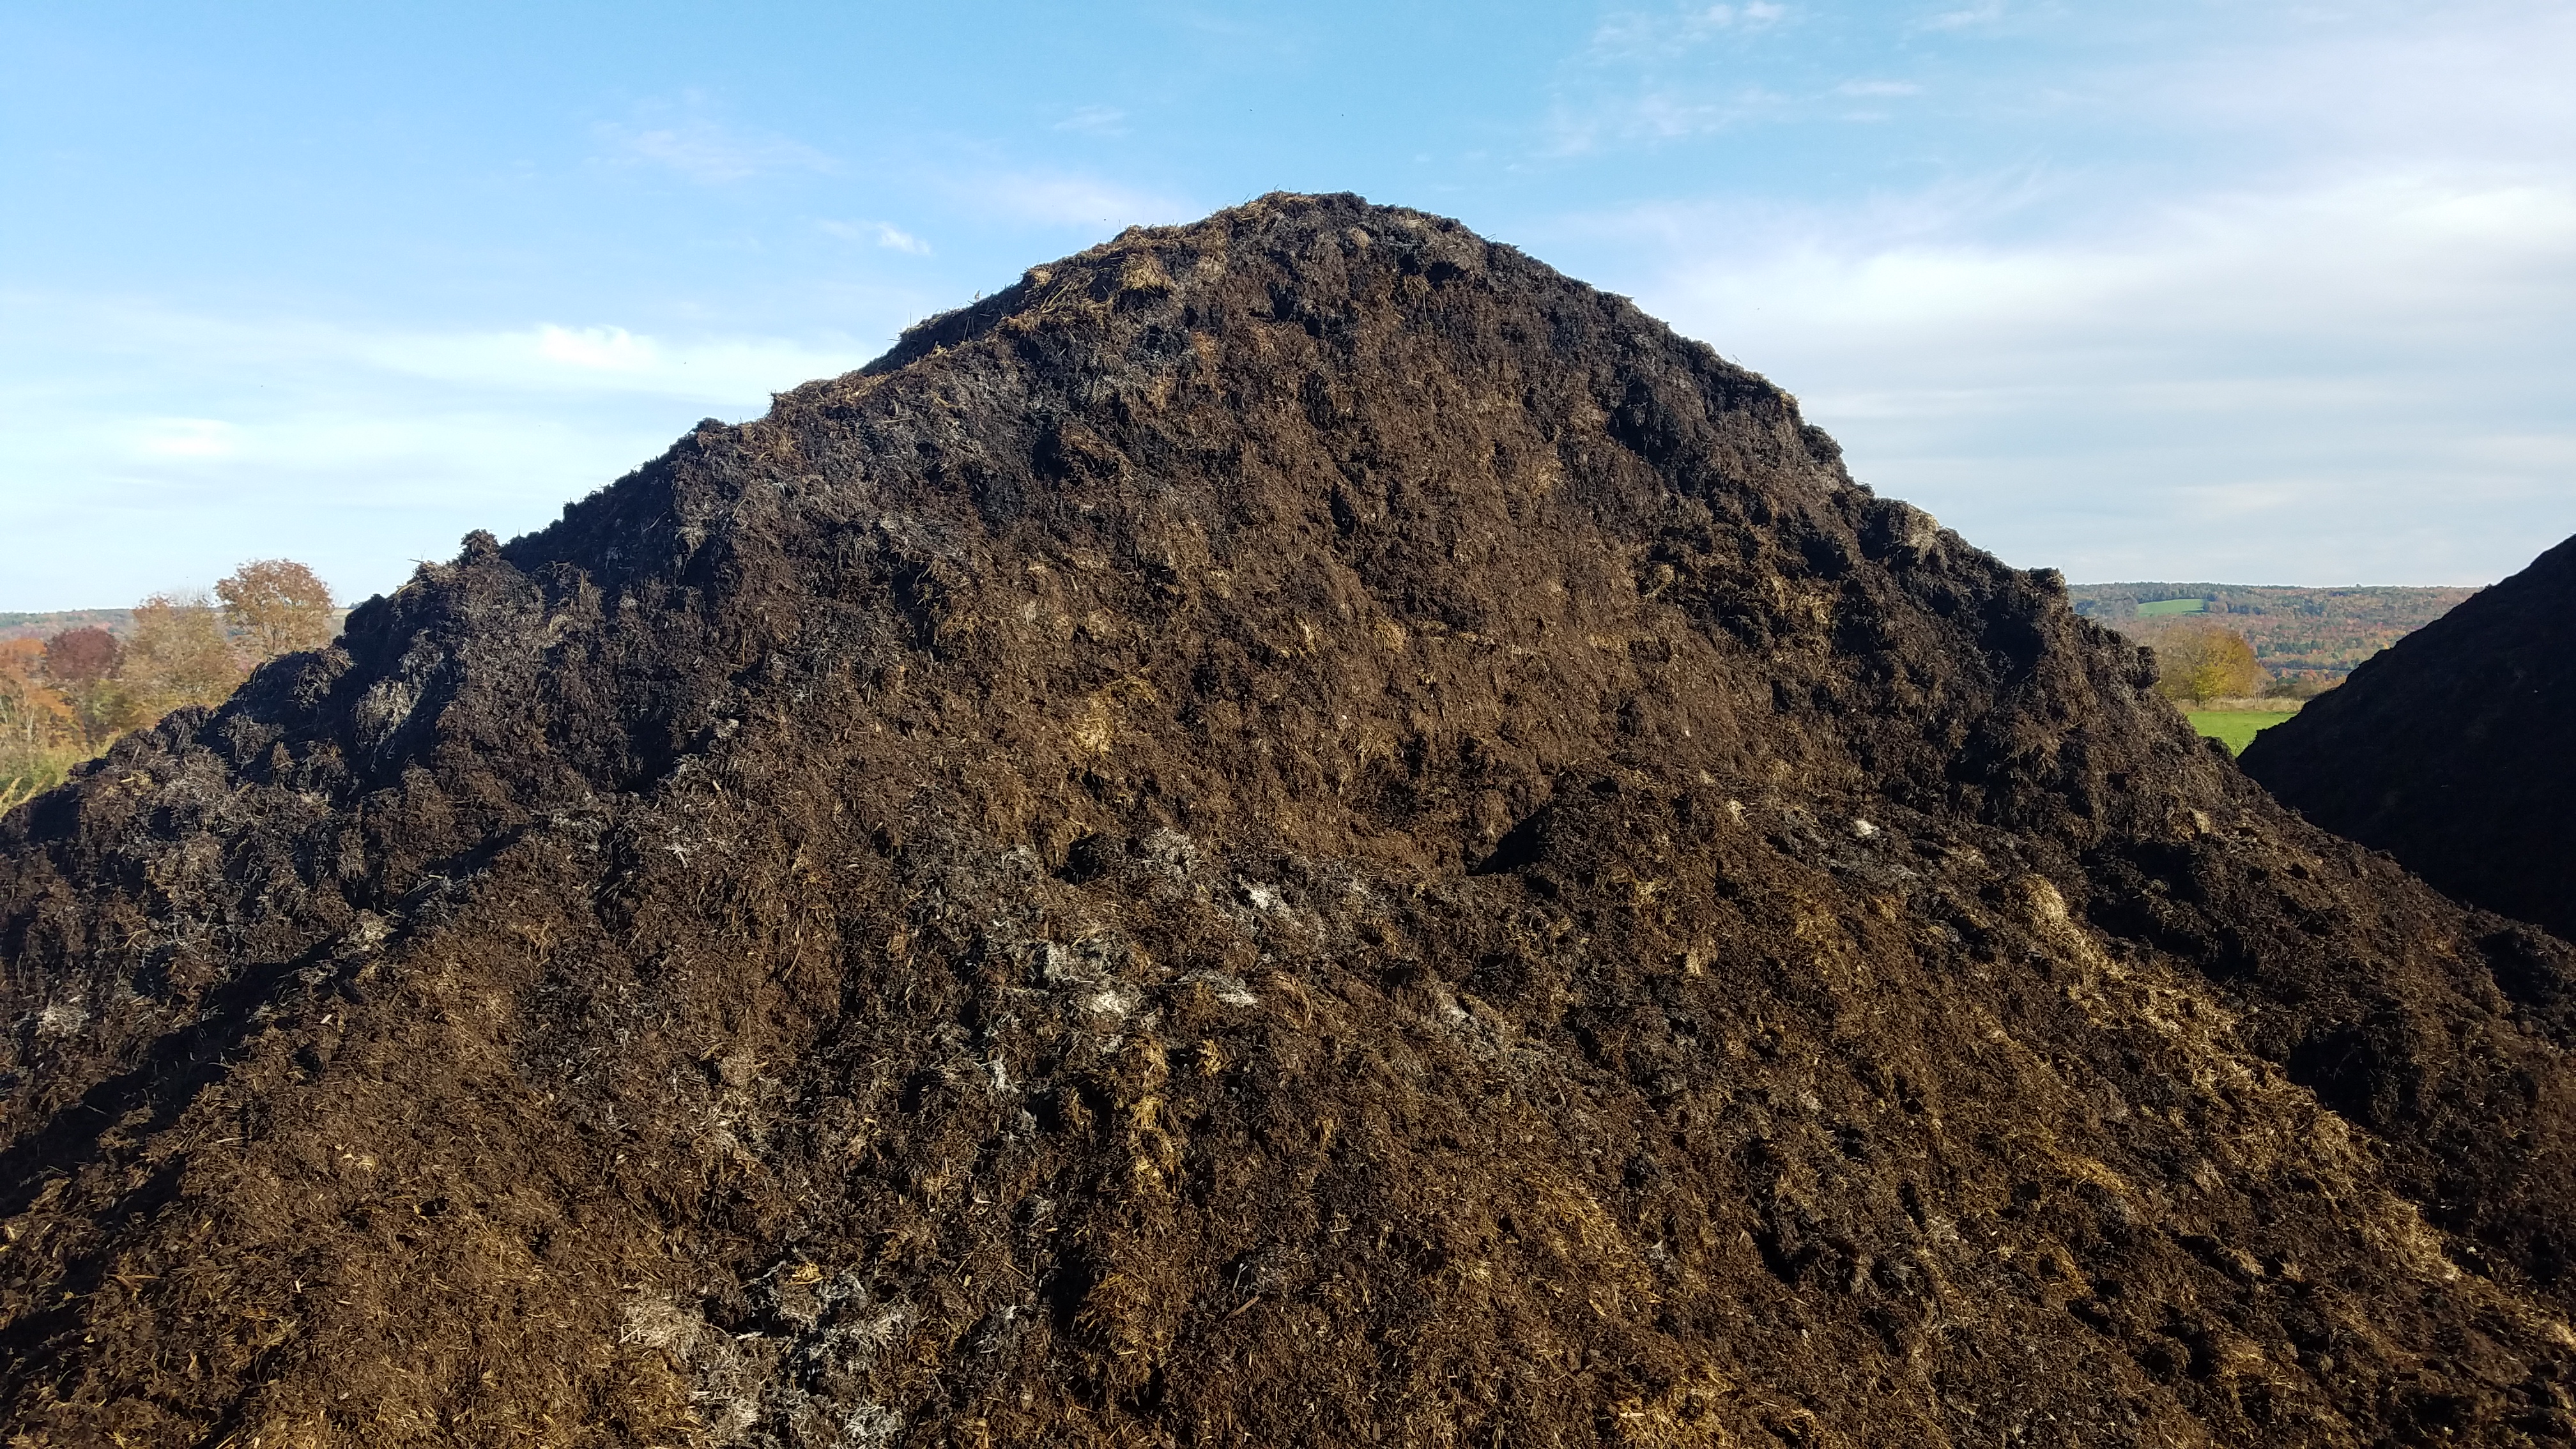 A pile of brown compost against a blue sky